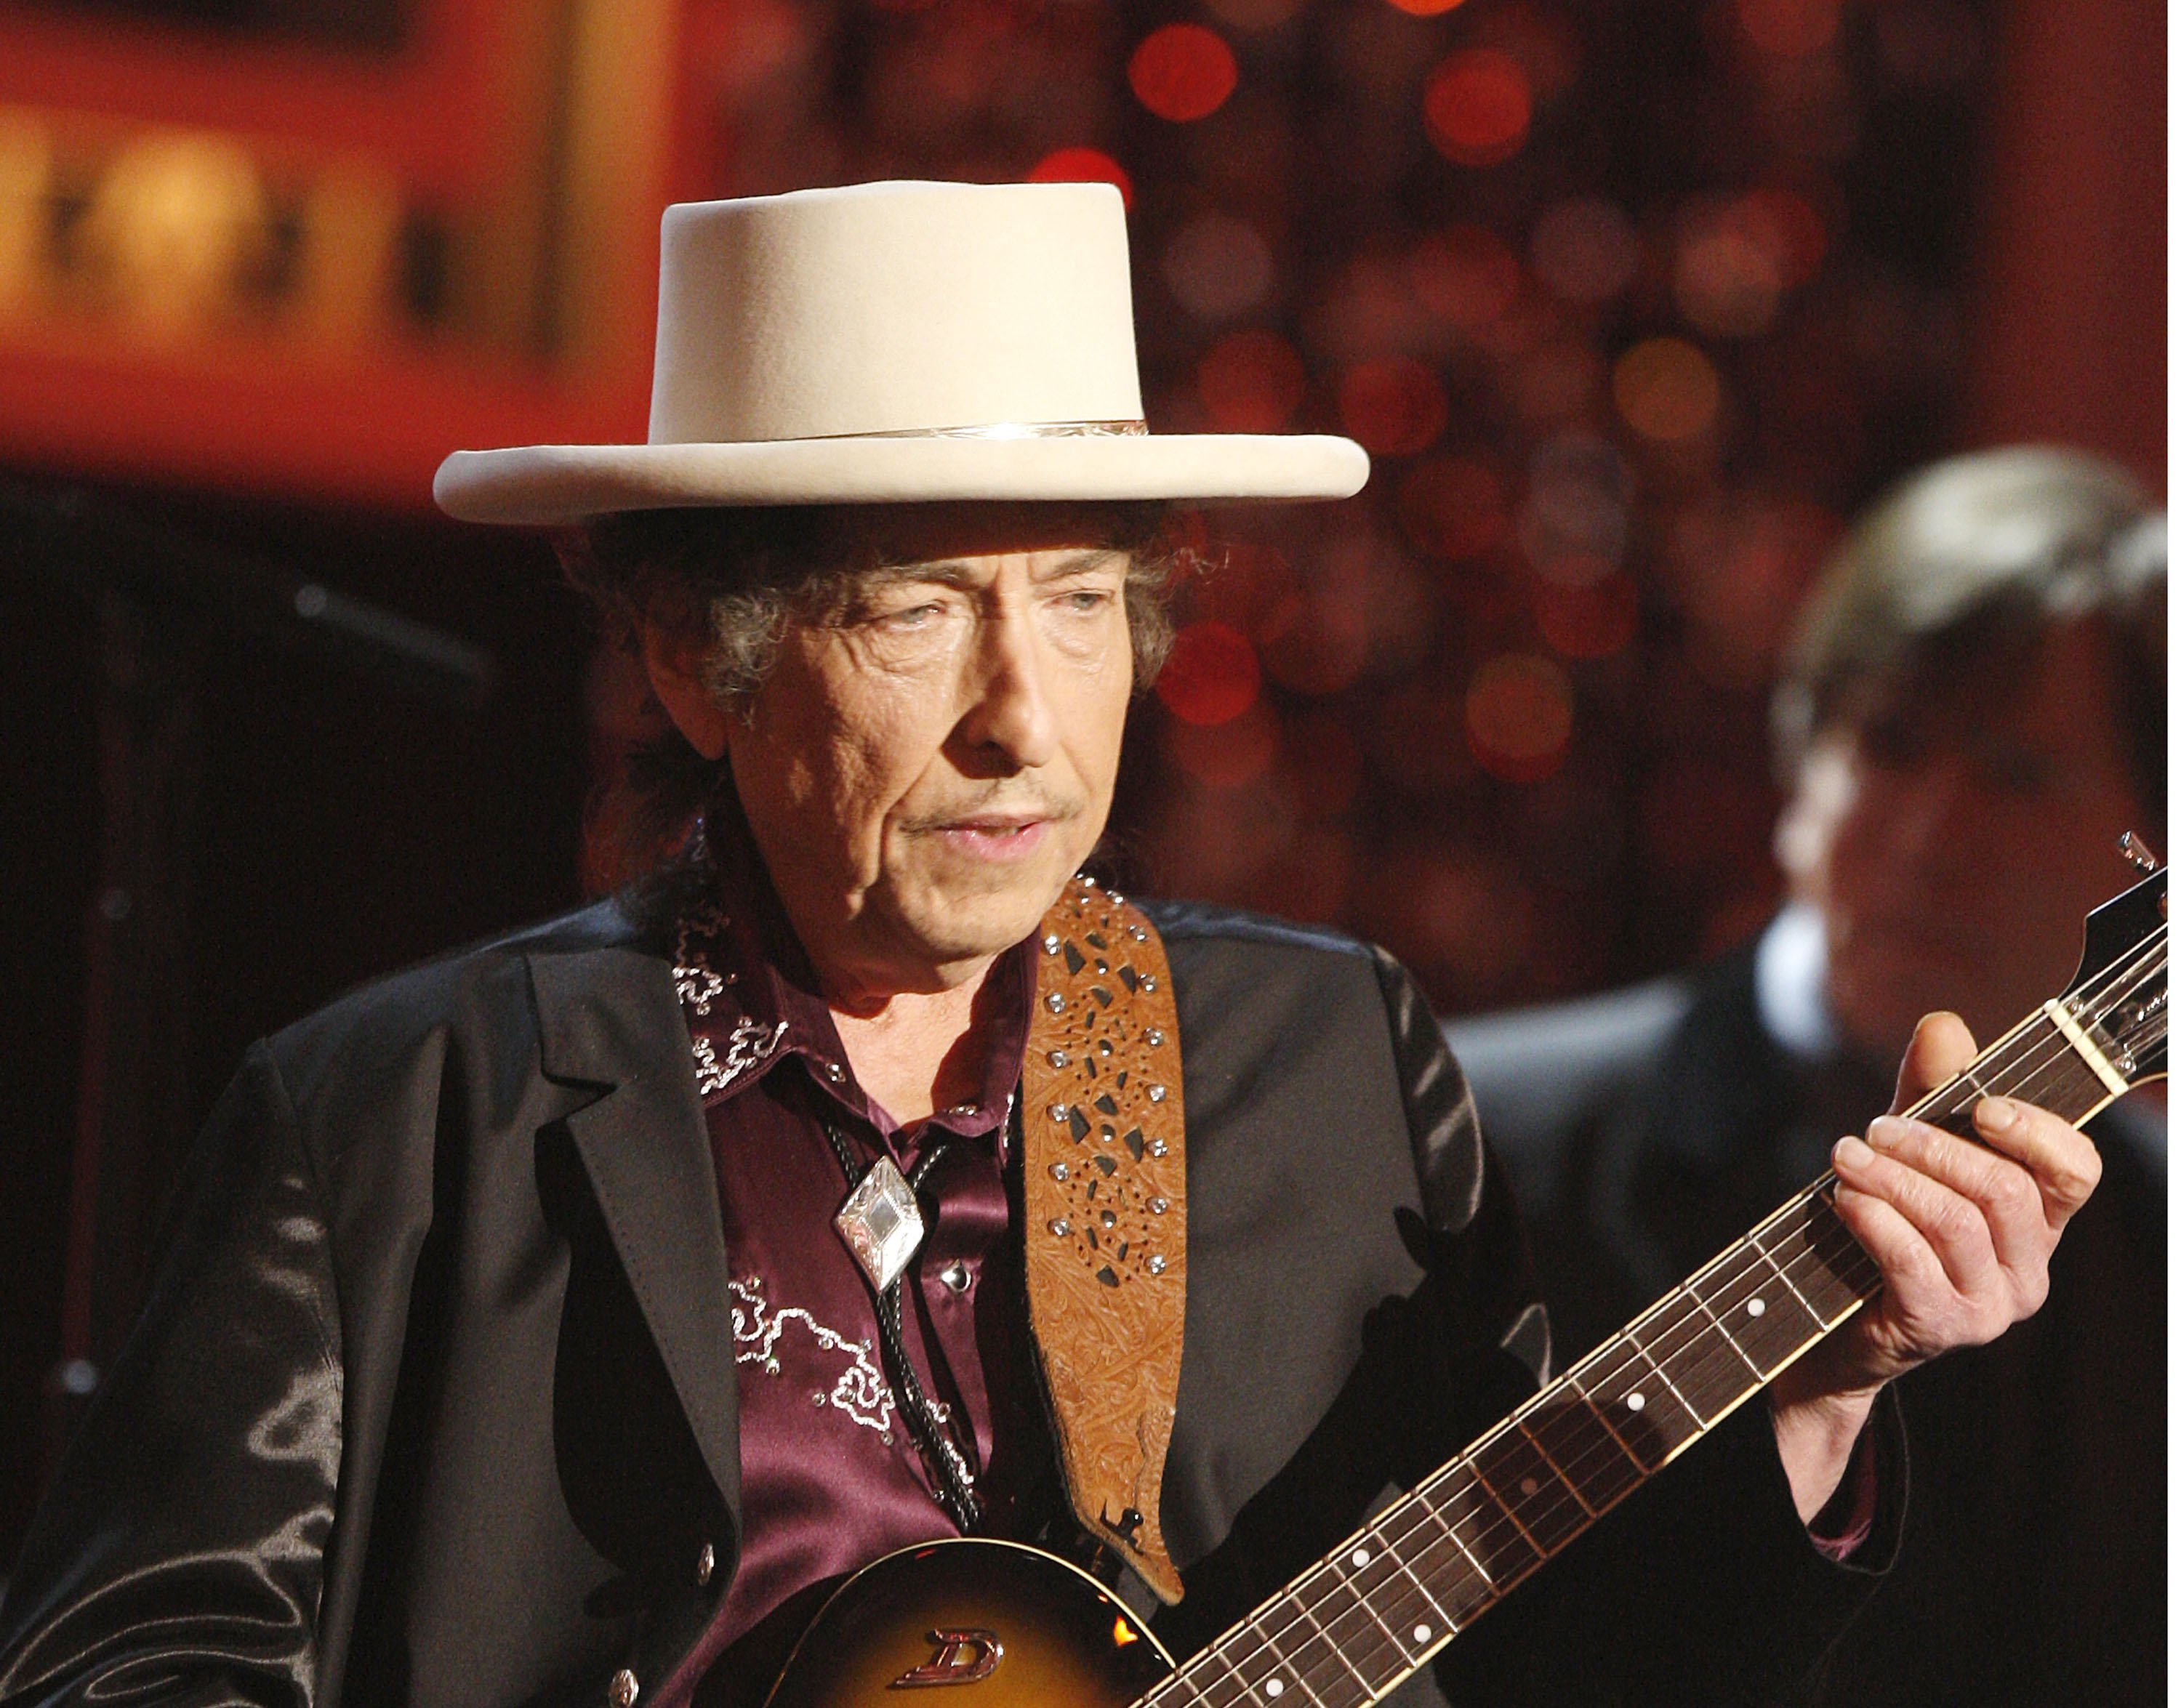 Paul McCartney Said Bob Dylan Never Stopped Touring Because of His Romantic Relationships